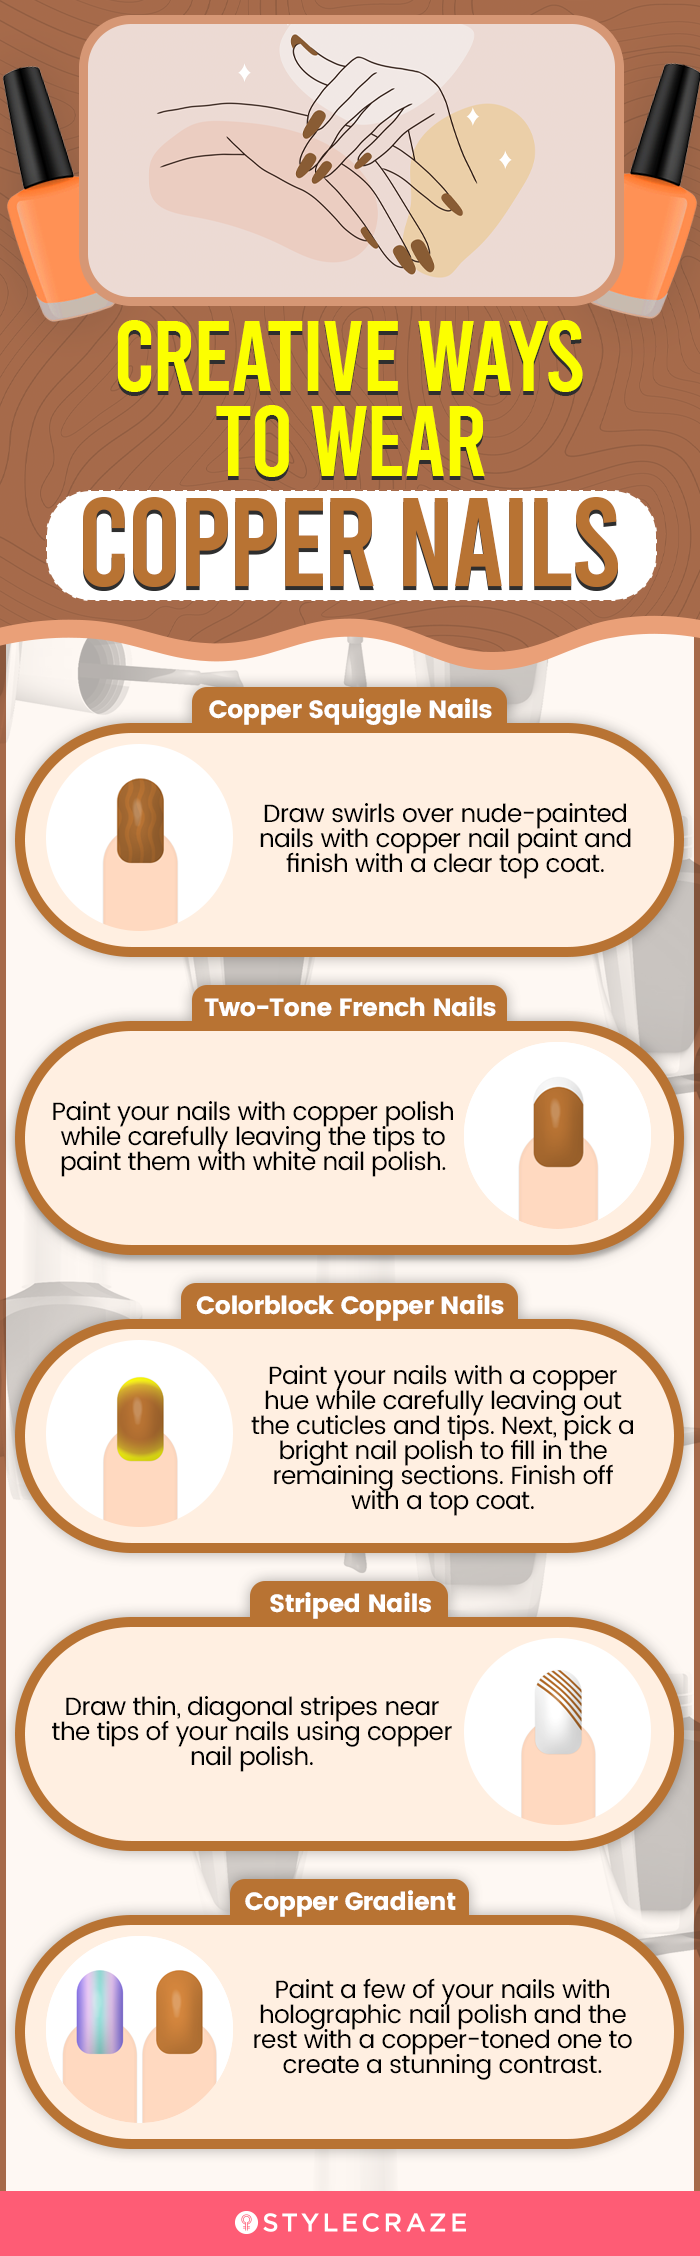 Creative Ways To Wear Copper Nails (infographic)